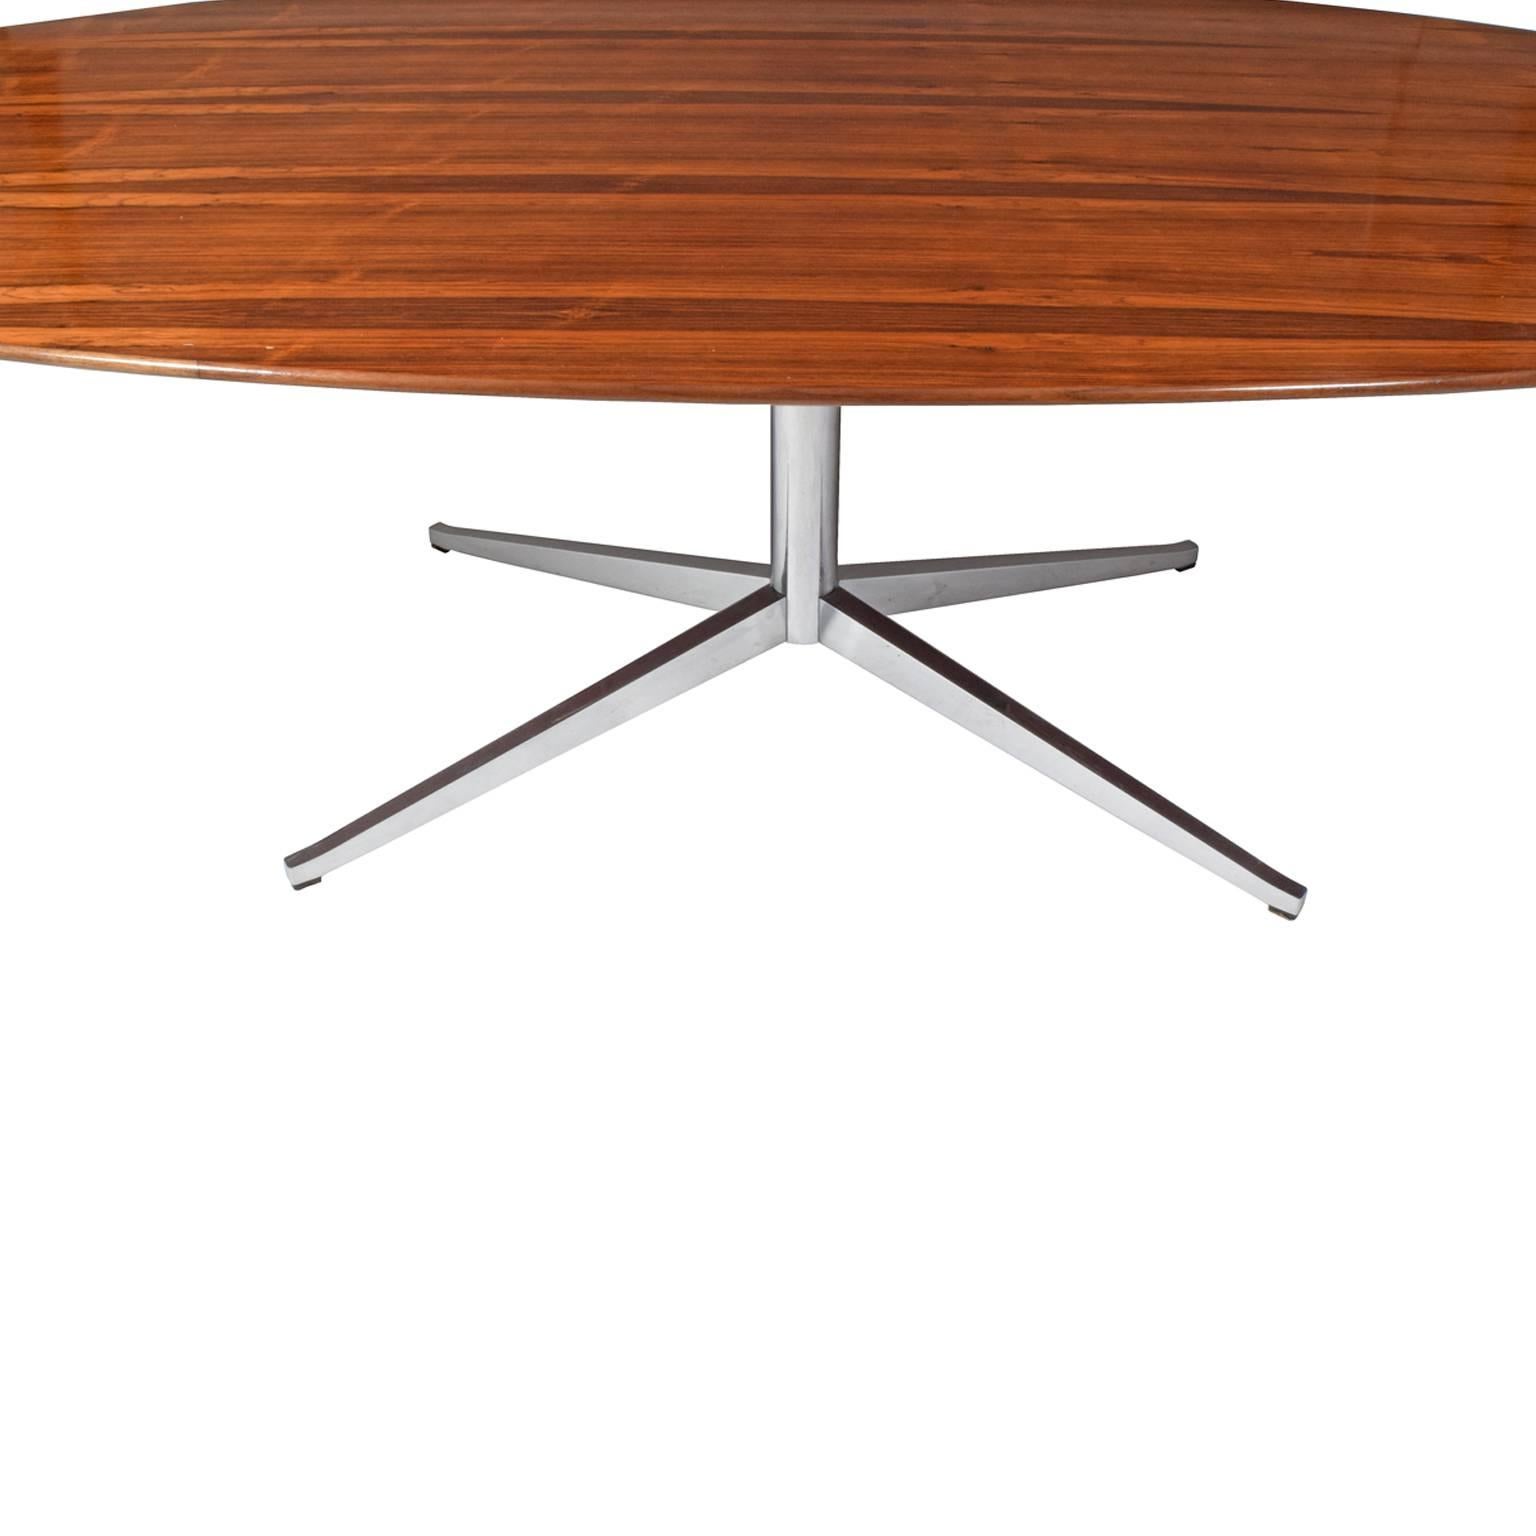 American Rosewood Table or Desk by Florence Knoll